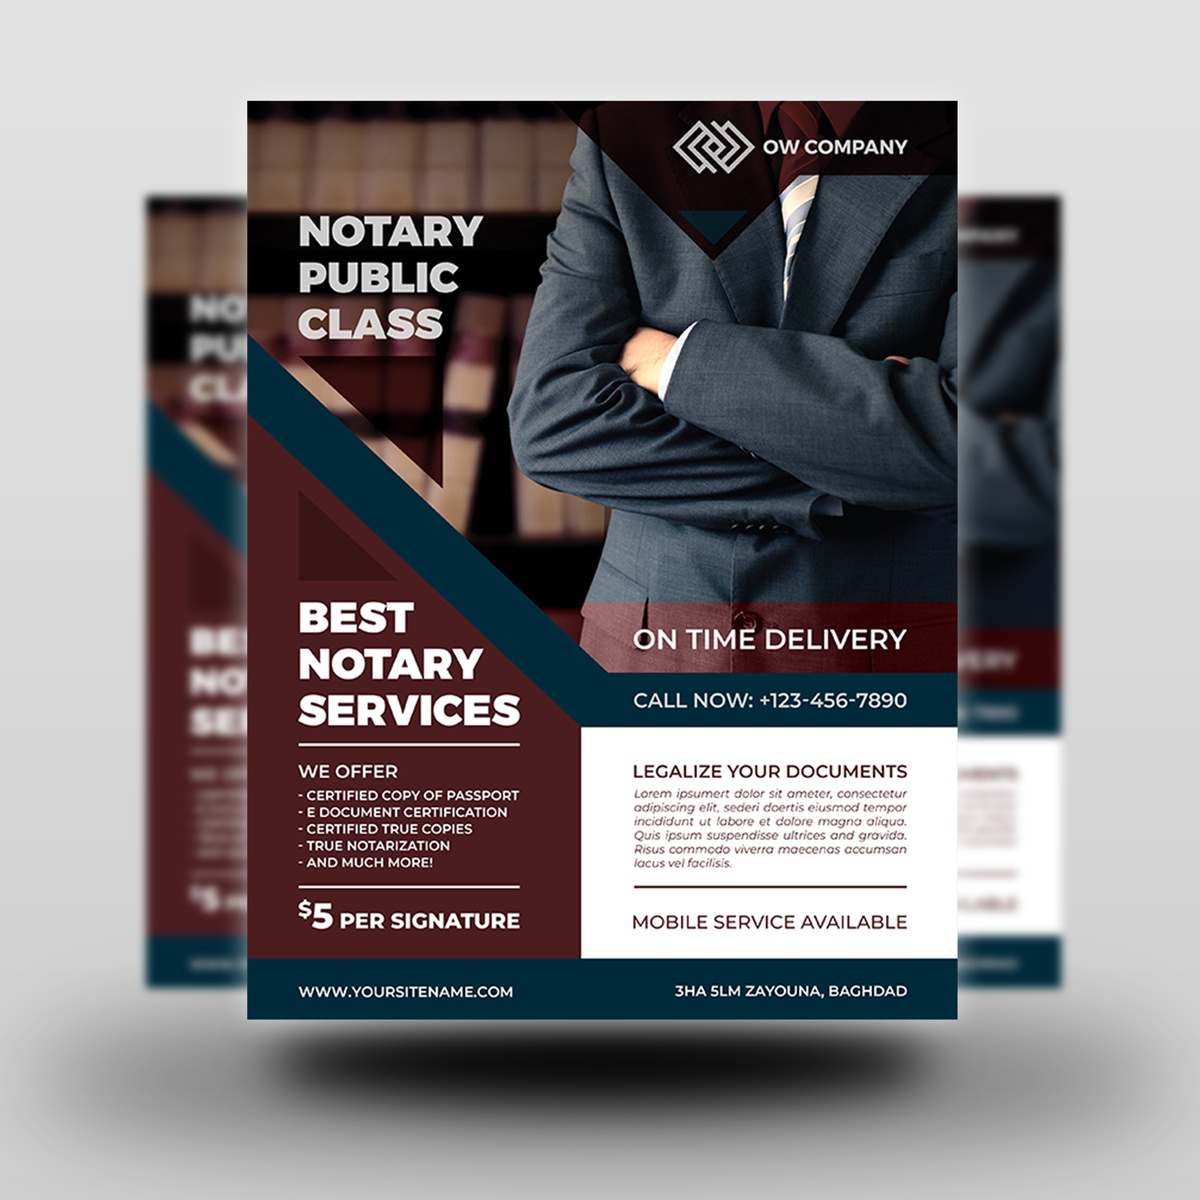 Notary Services Flyer Template by OWPictures on Dribbble In Notary Public Flyer Template With Notary Public Flyer Template